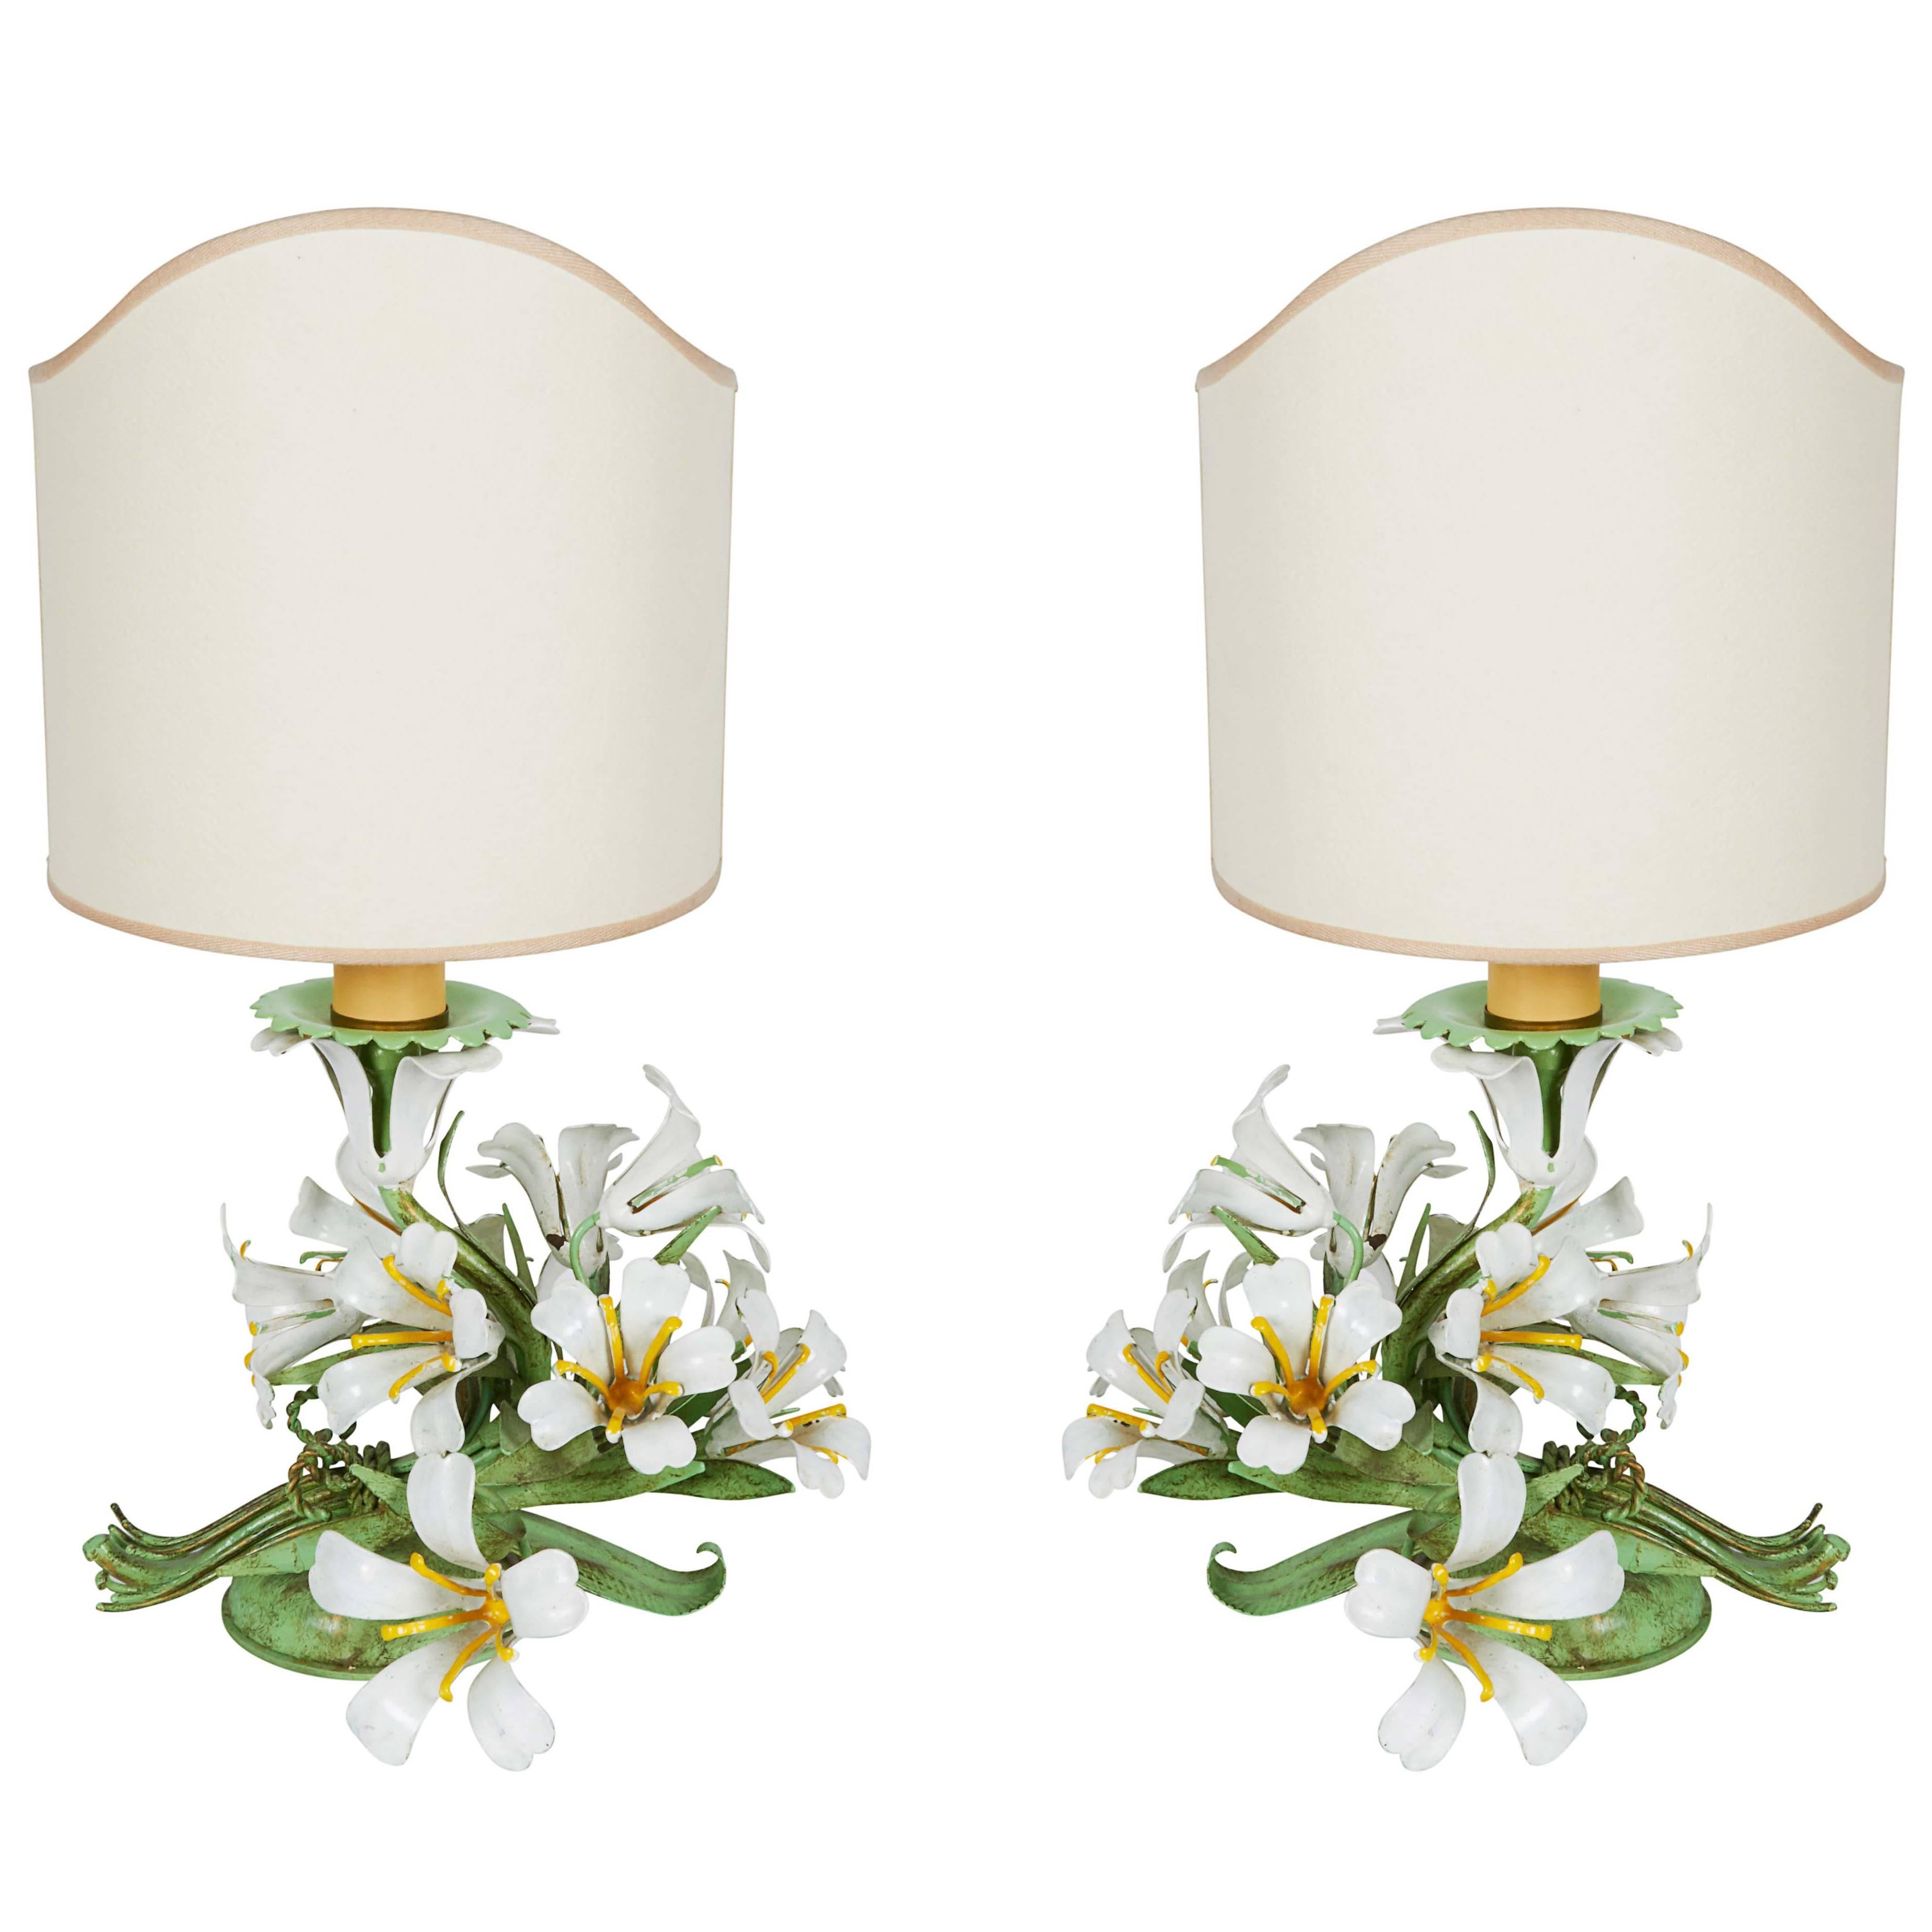 Pair of Italian Floral Lamps with Original Shades